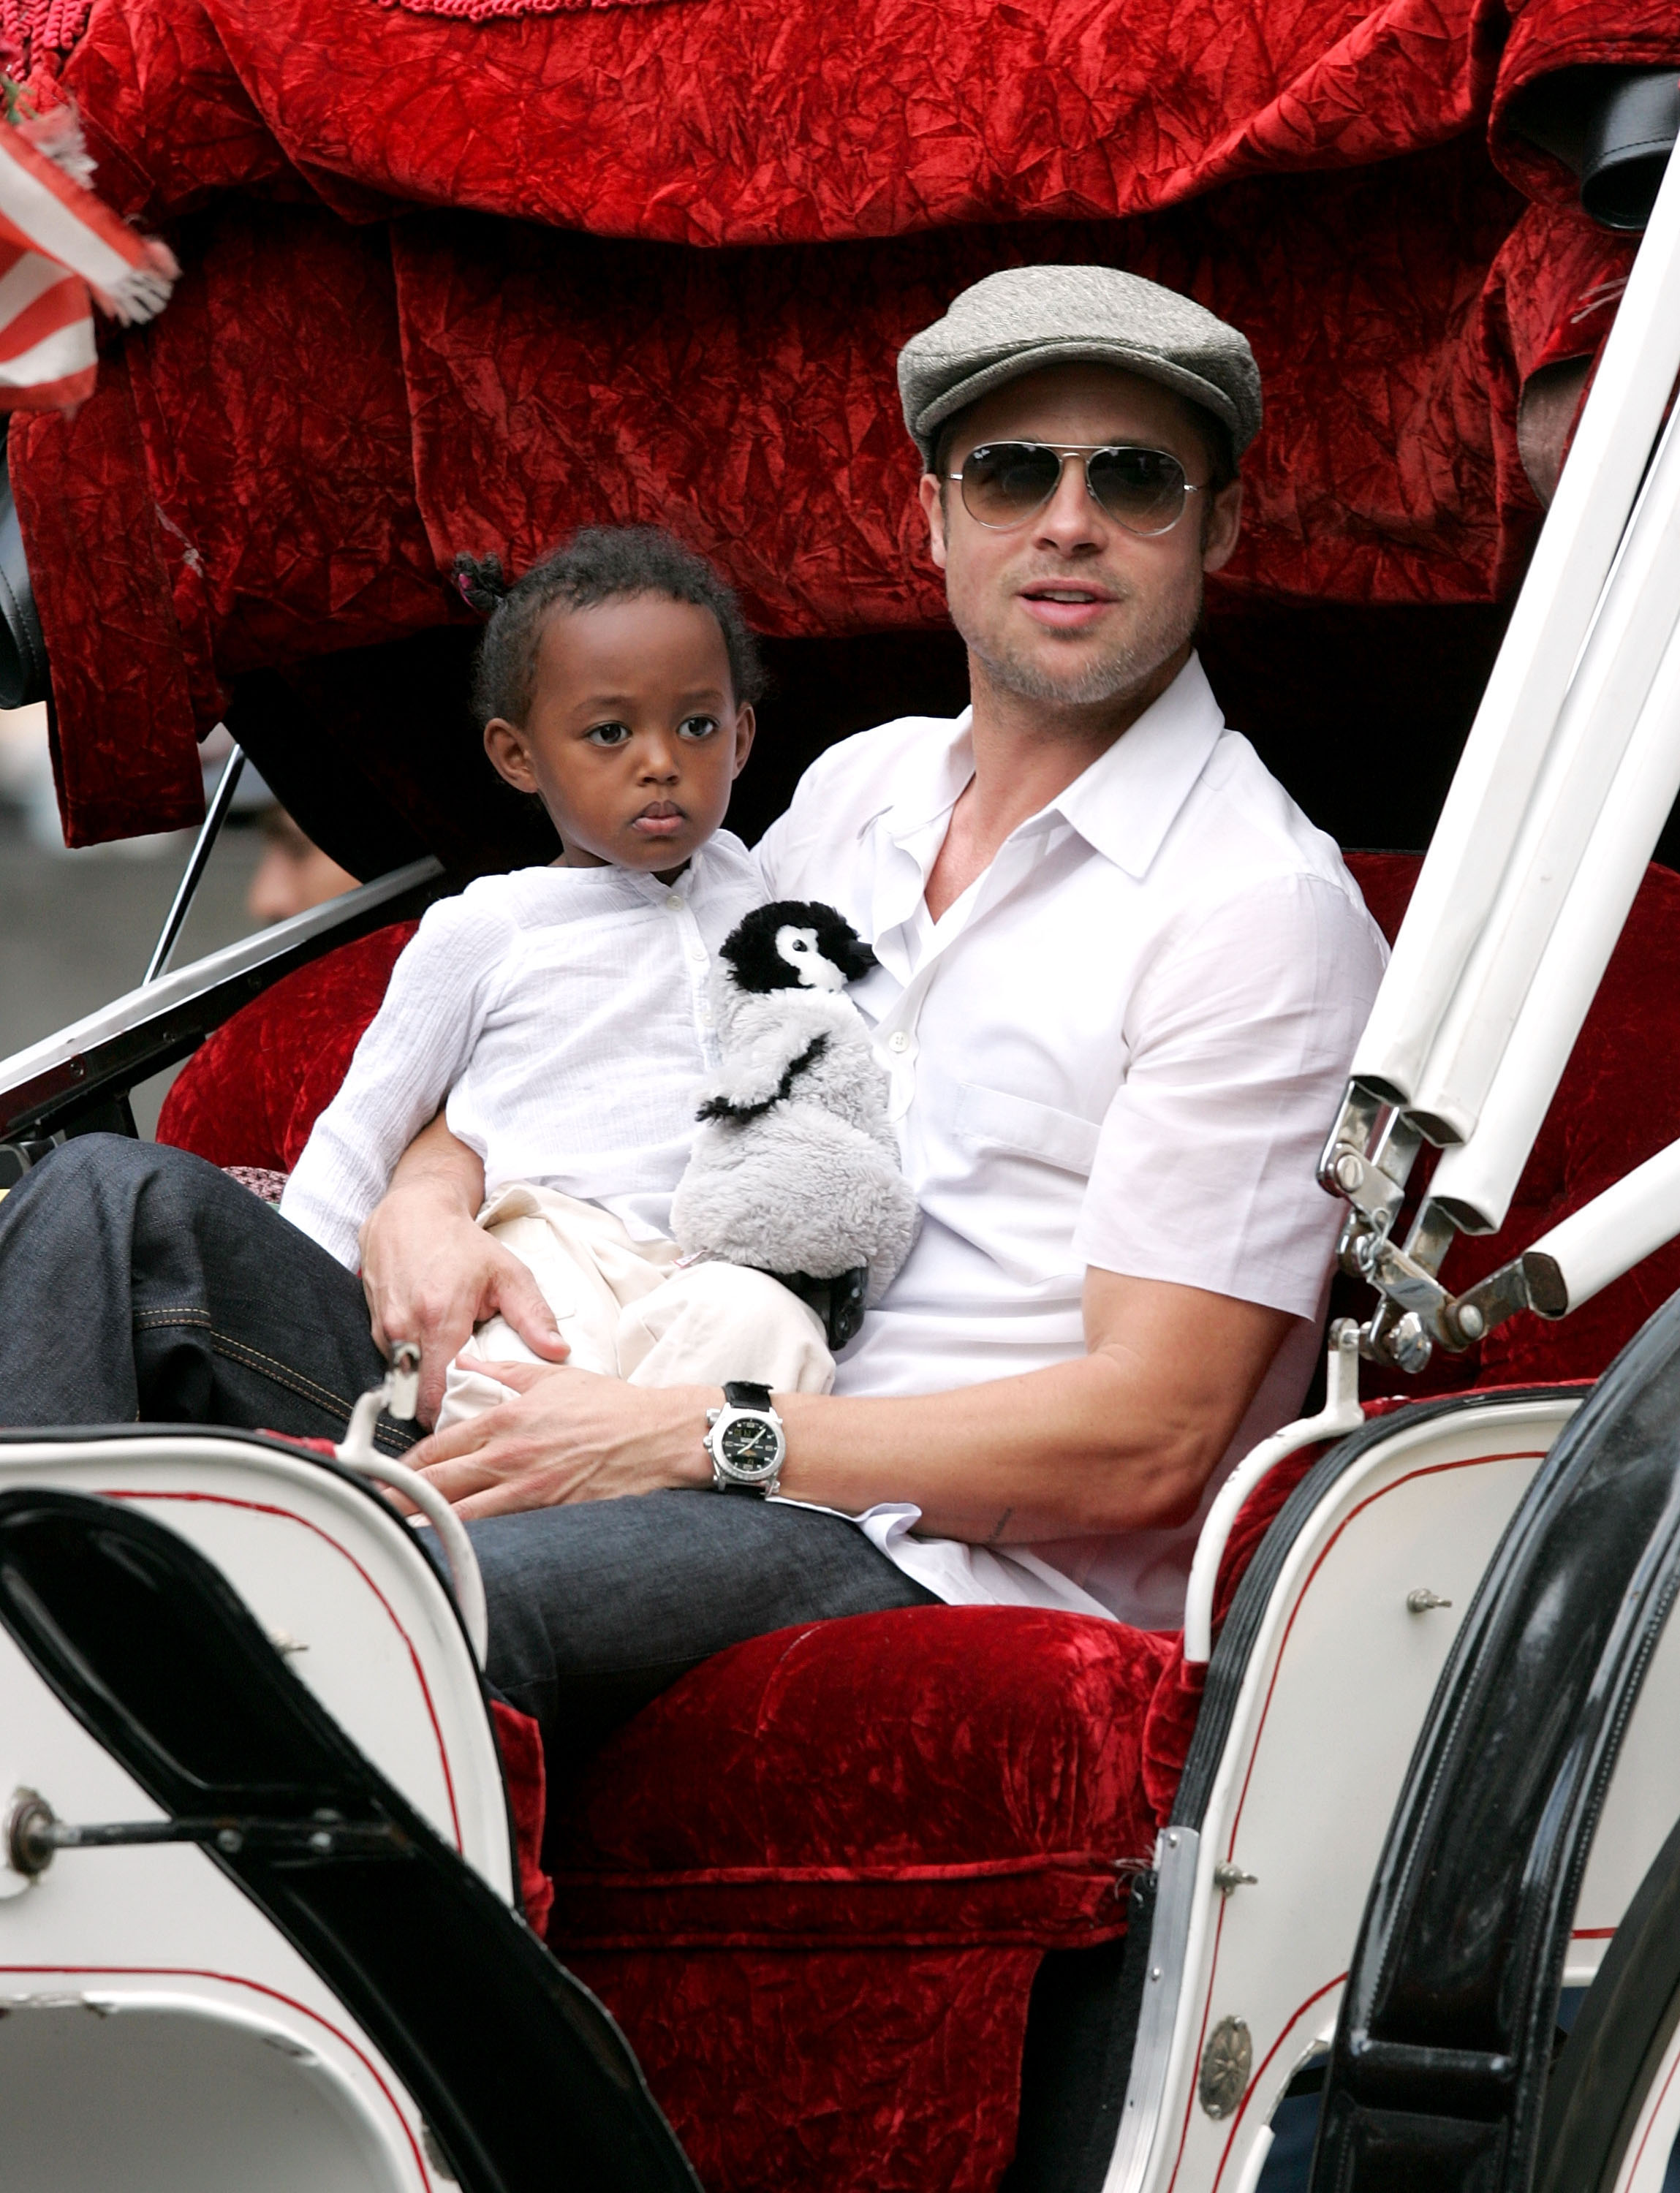 Brad Pitt and his daughter Zahara Jolie-Pitt visiting Central Park on August 28, 2007 in New York City | Source: Getty Images